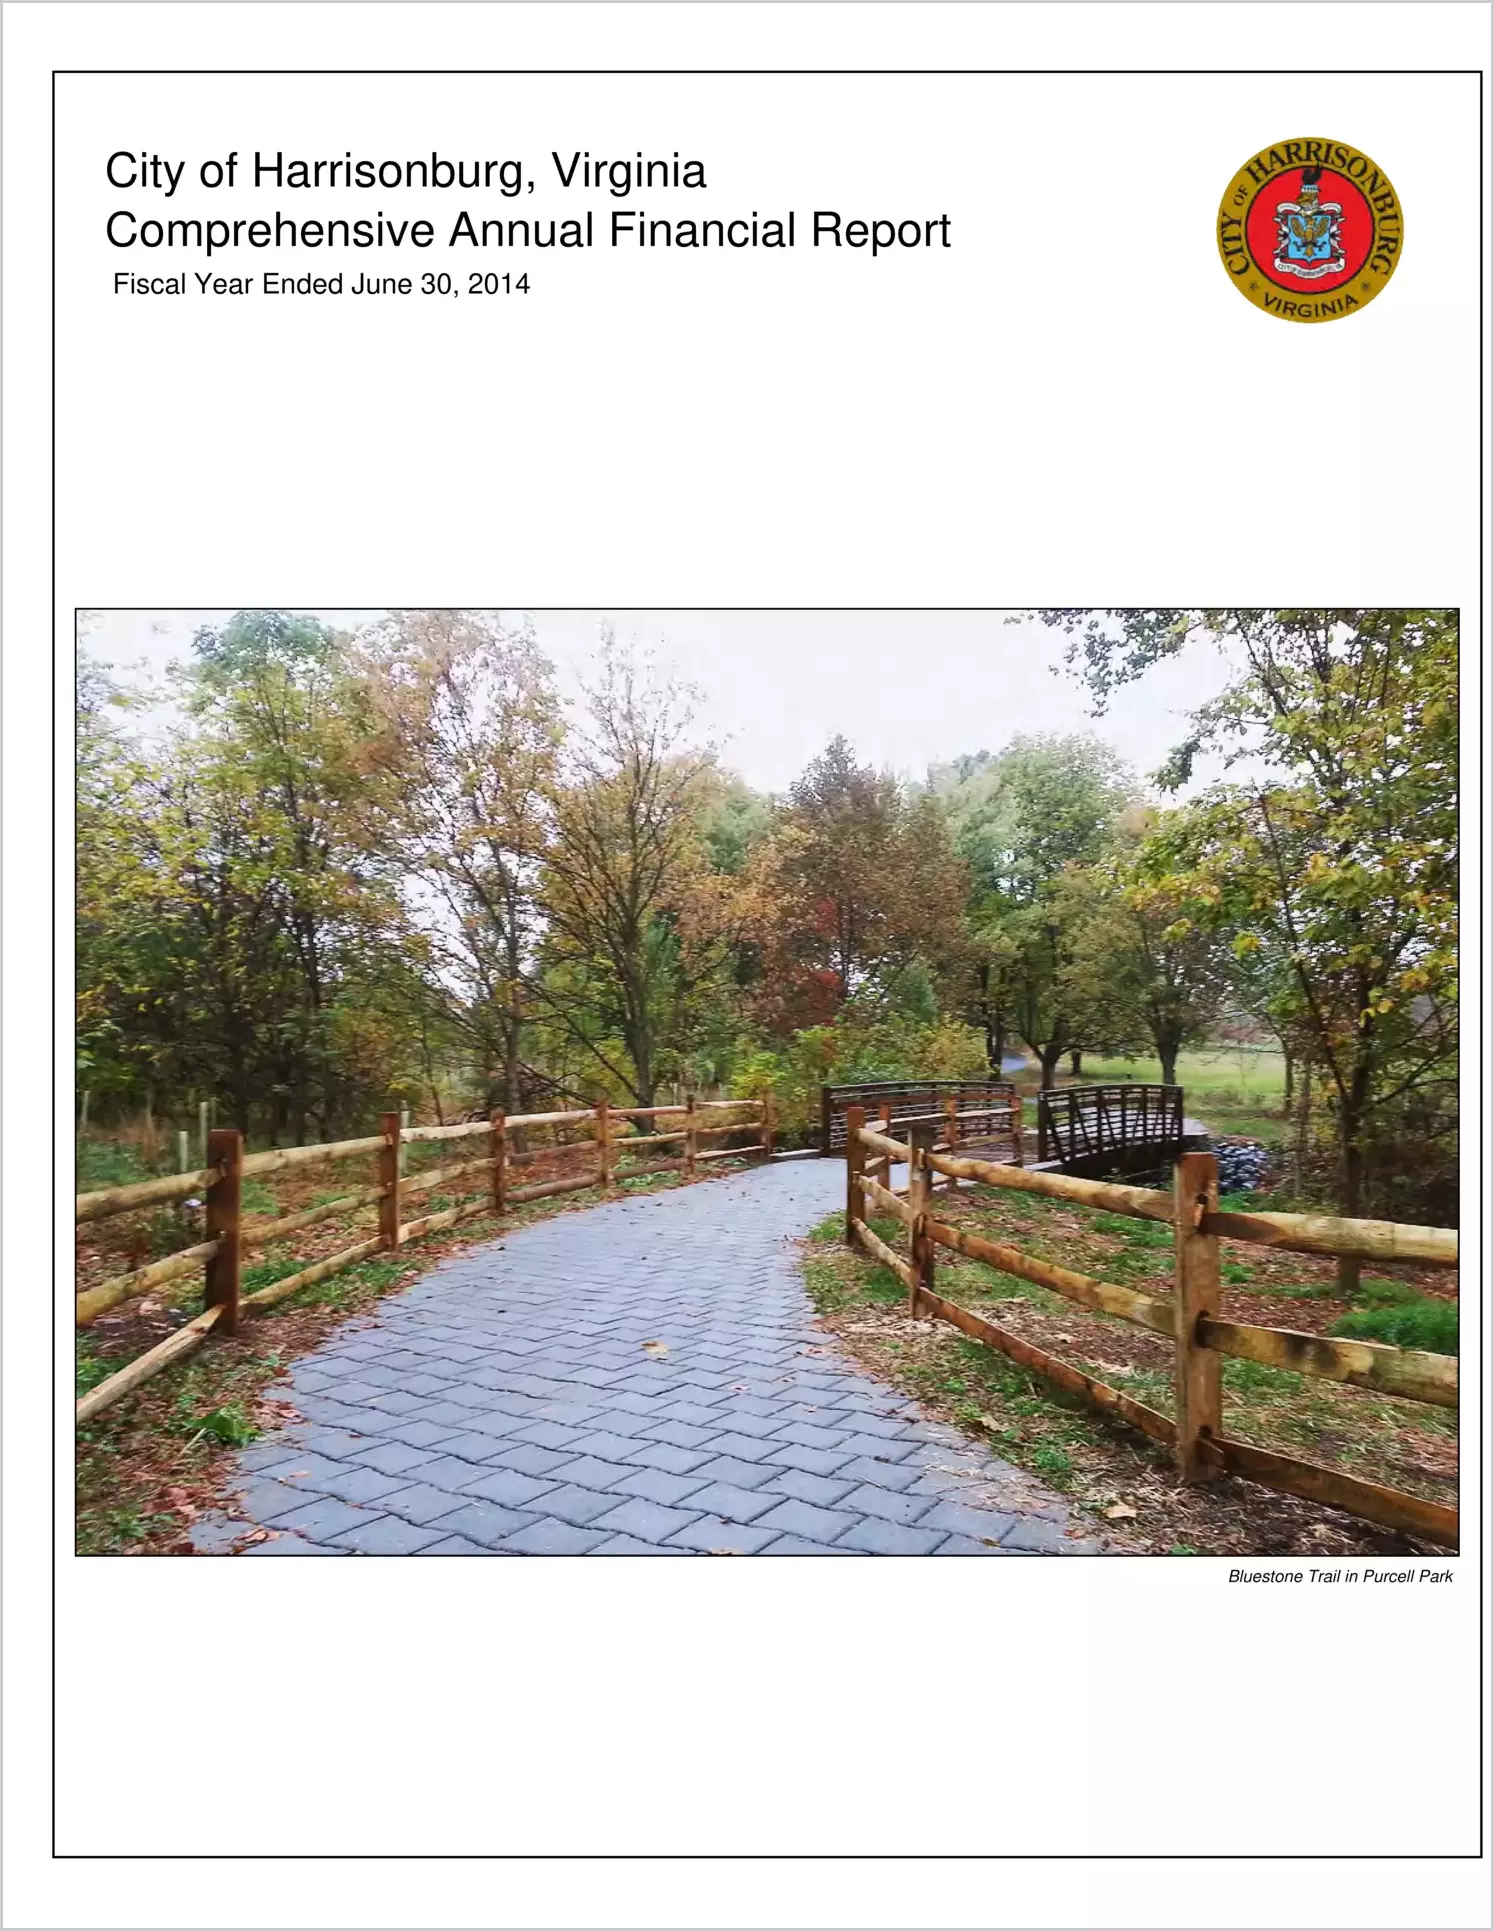 2014 Annual Financial Report for City of Harrisonburg